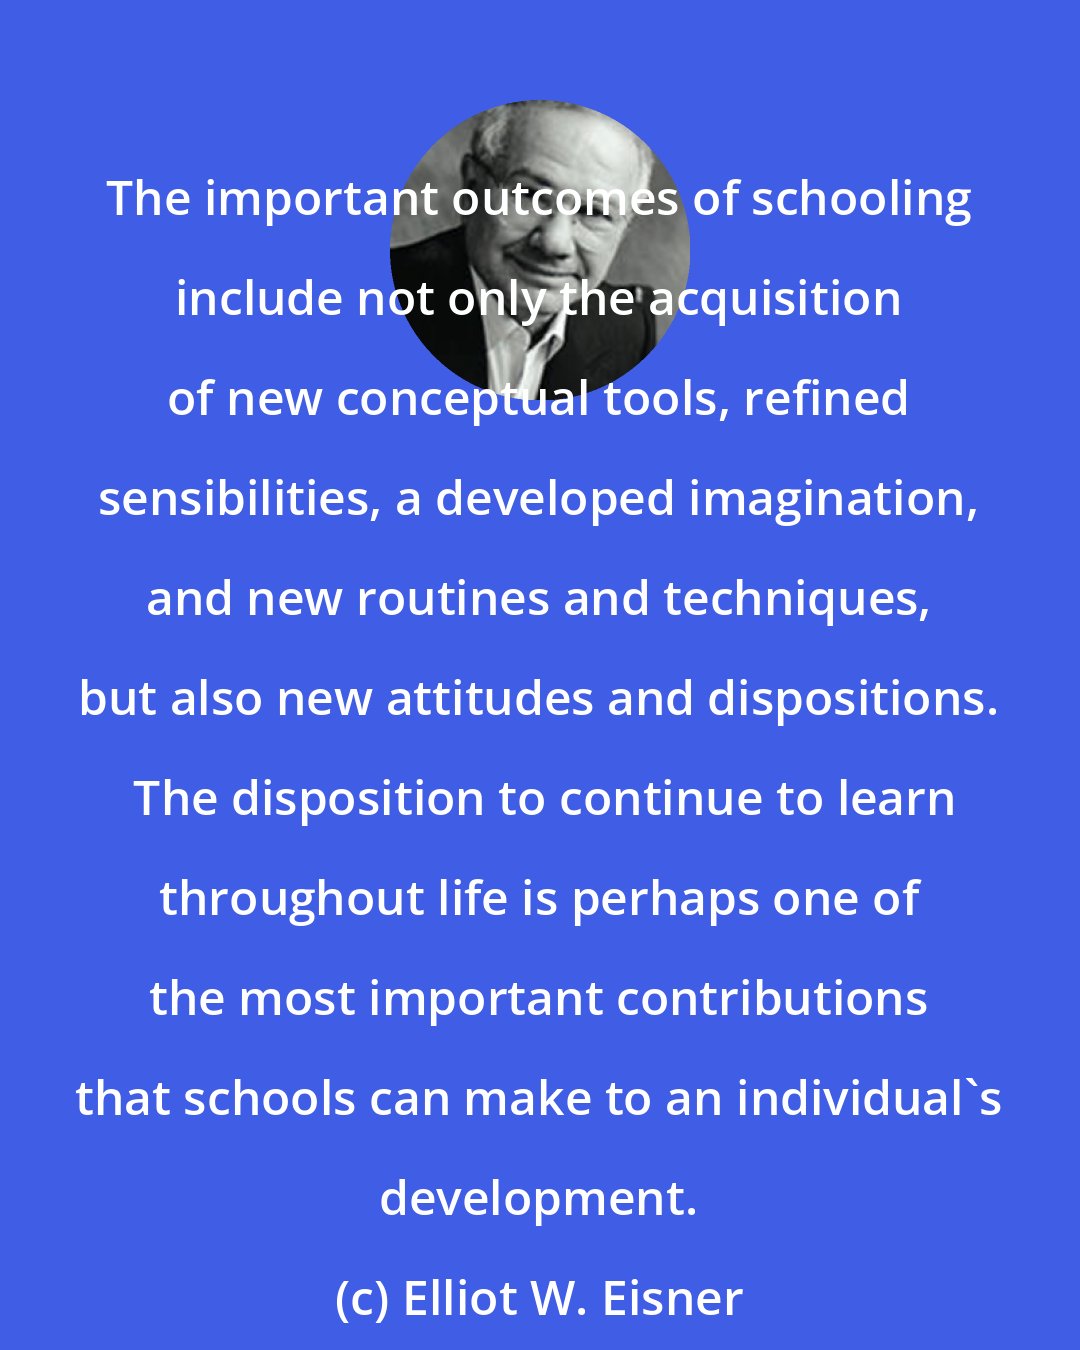 Elliot W. Eisner: The important outcomes of schooling include not only the acquisition of new conceptual tools, refined sensibilities, a developed imagination, and new routines and techniques, but also new attitudes and dispositions.  The disposition to continue to learn throughout life is perhaps one of the most important contributions that schools can make to an individual's development.